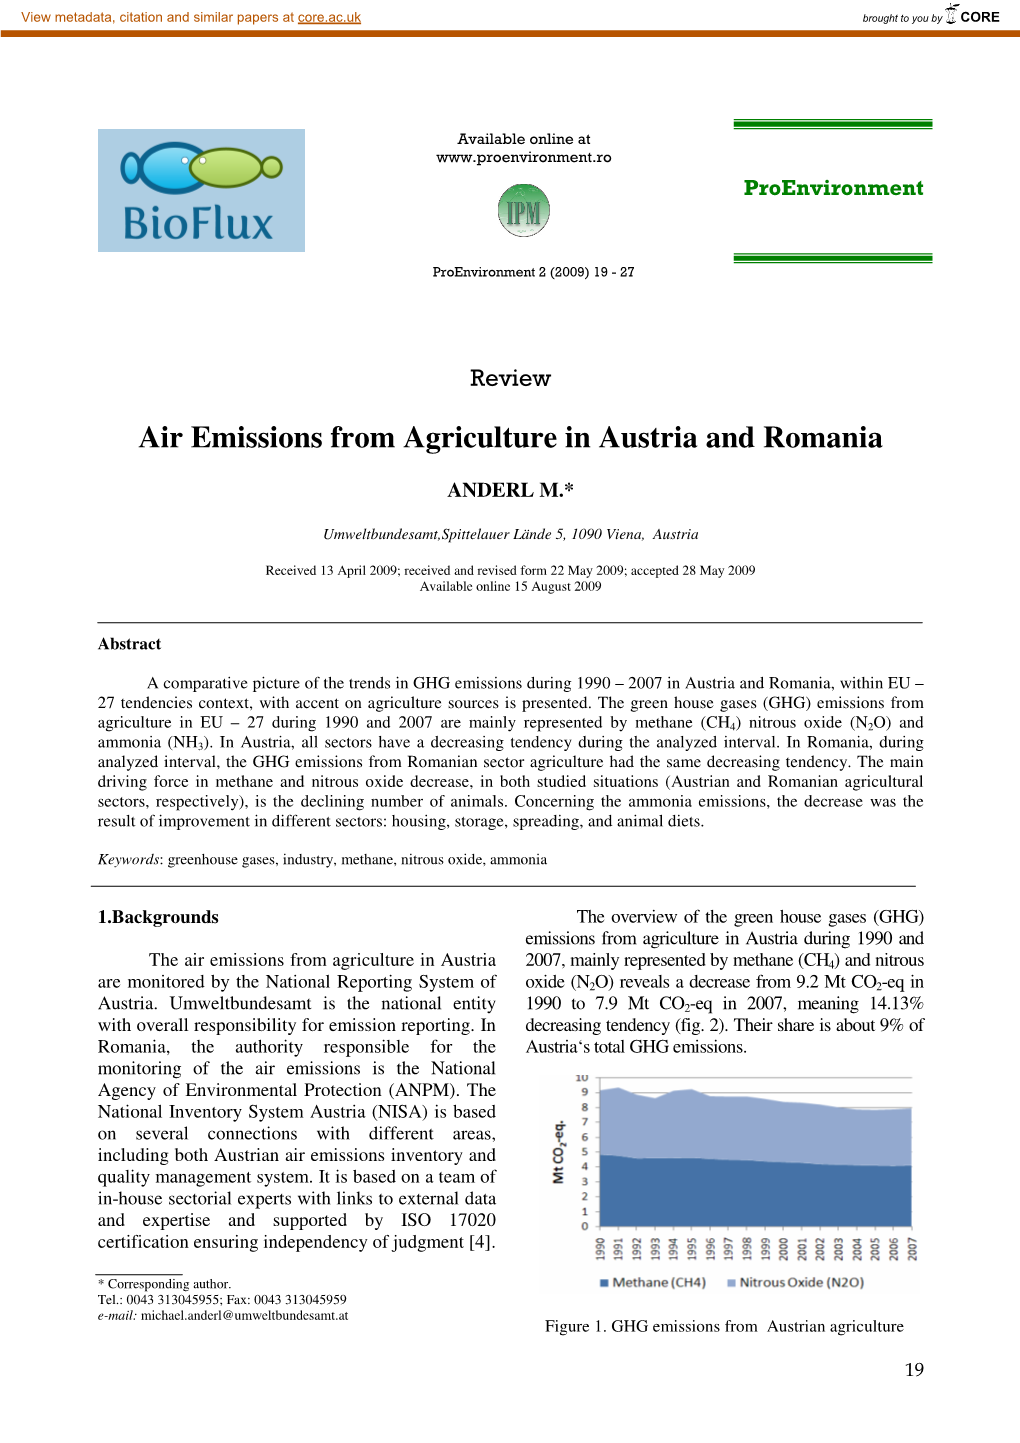 Air Emissions from Agriculture in Austria and Romania